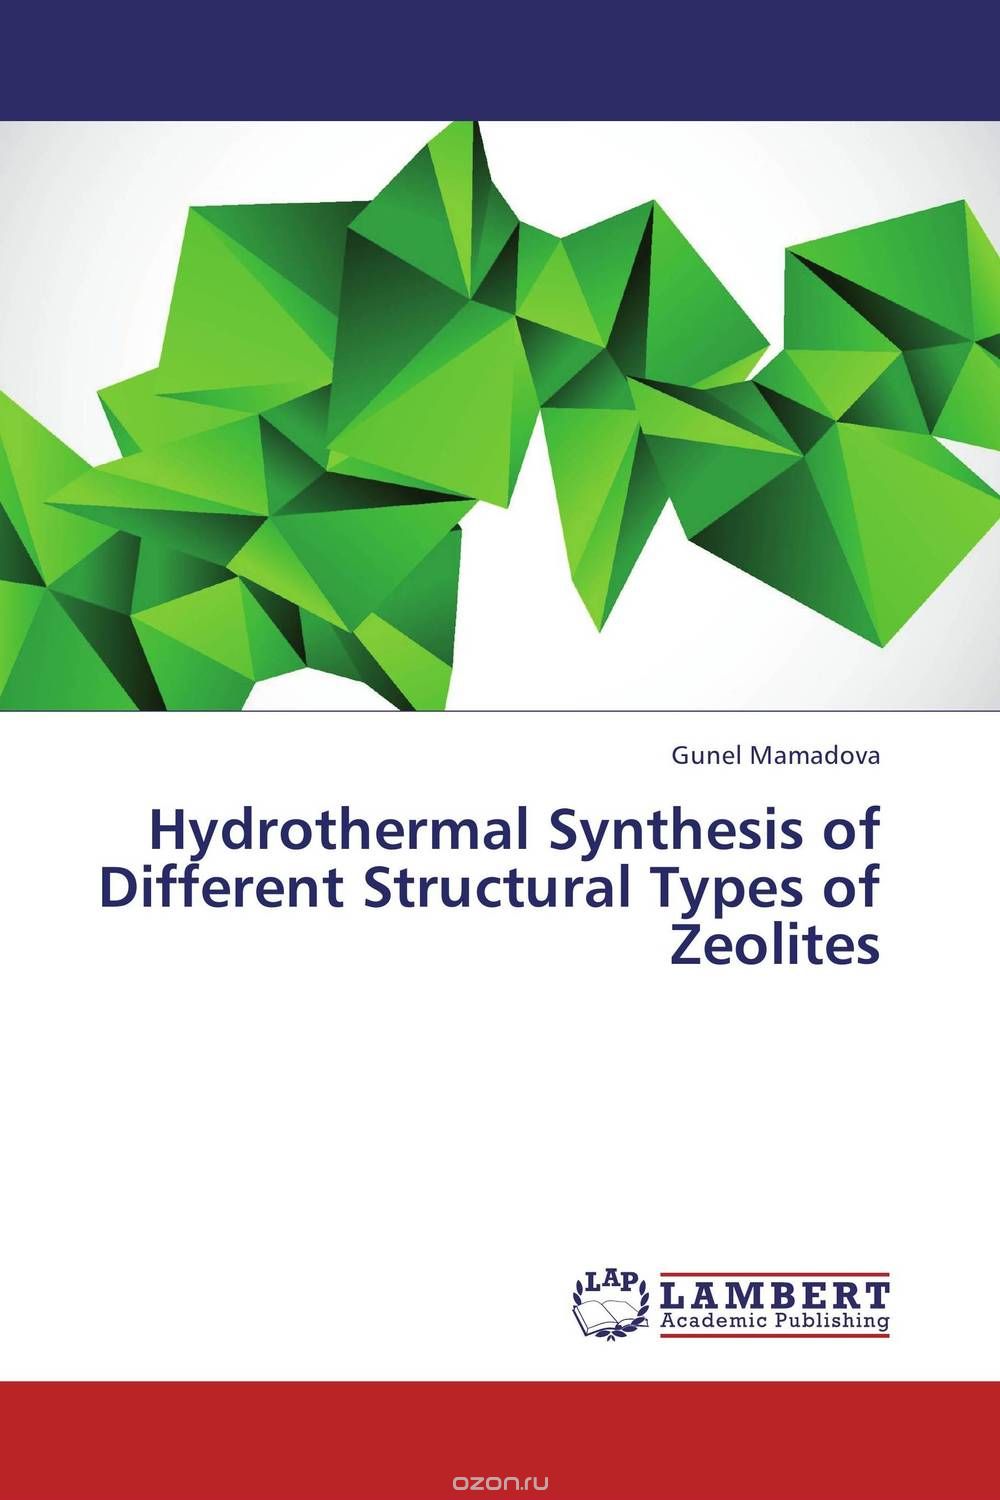 Скачать книгу "Hydrothermal Synthesis of Different Structural Types of Zeolites"